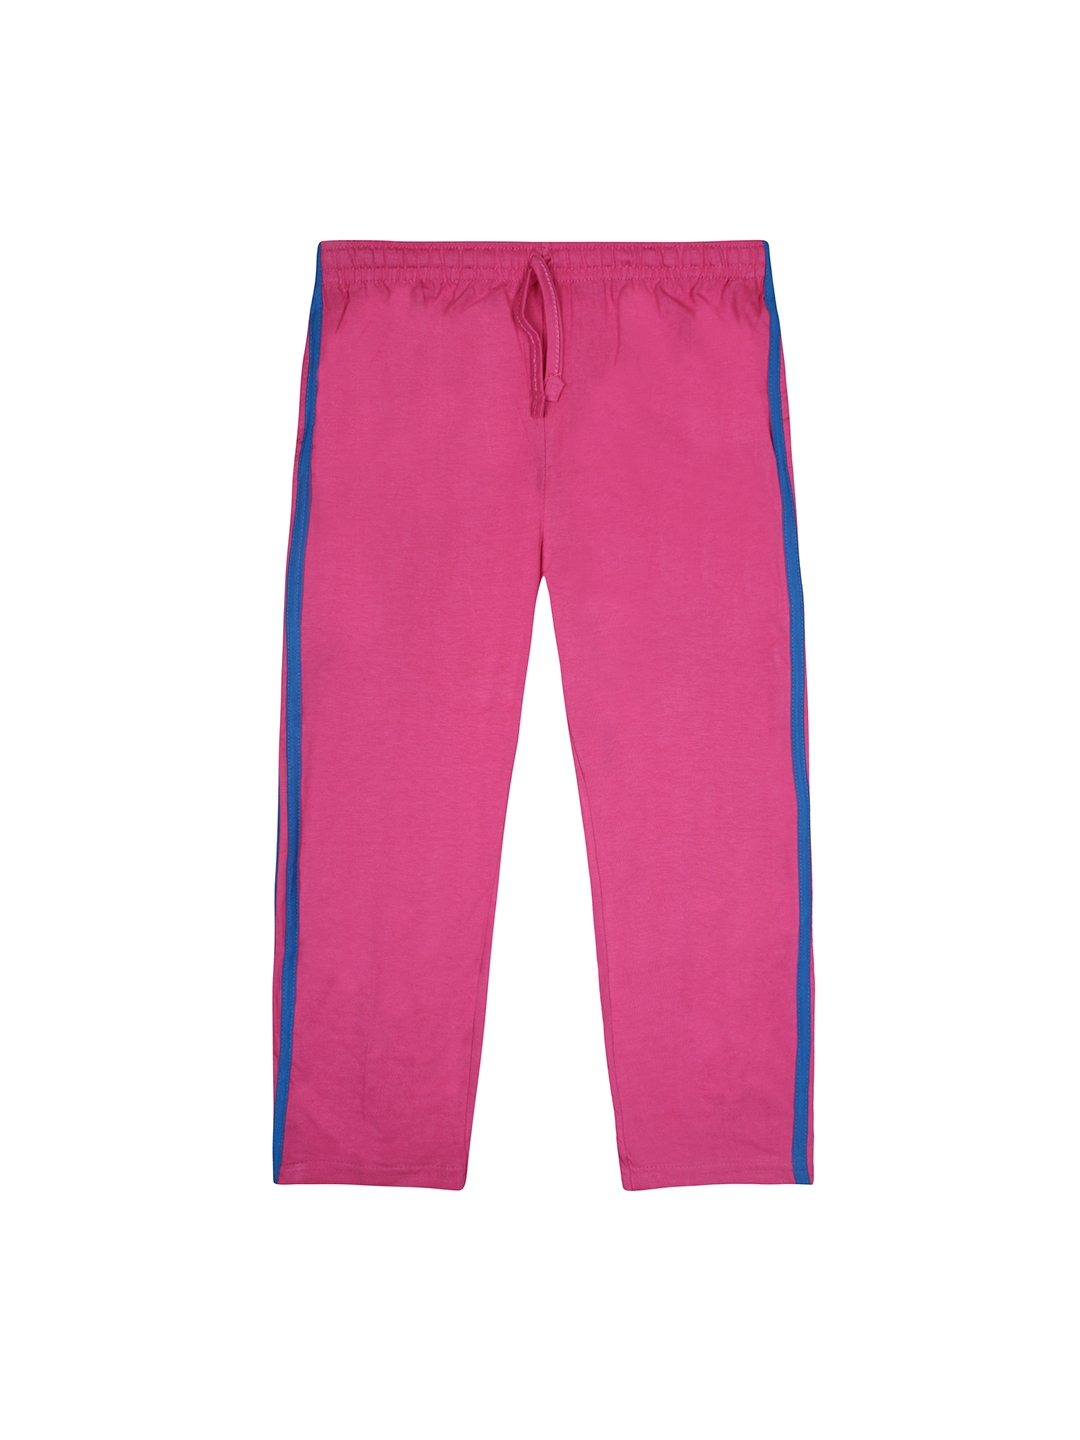 Buy Jazzup Girls Pink Track Pants - Track Pants for Girls 1392489 | Myntra